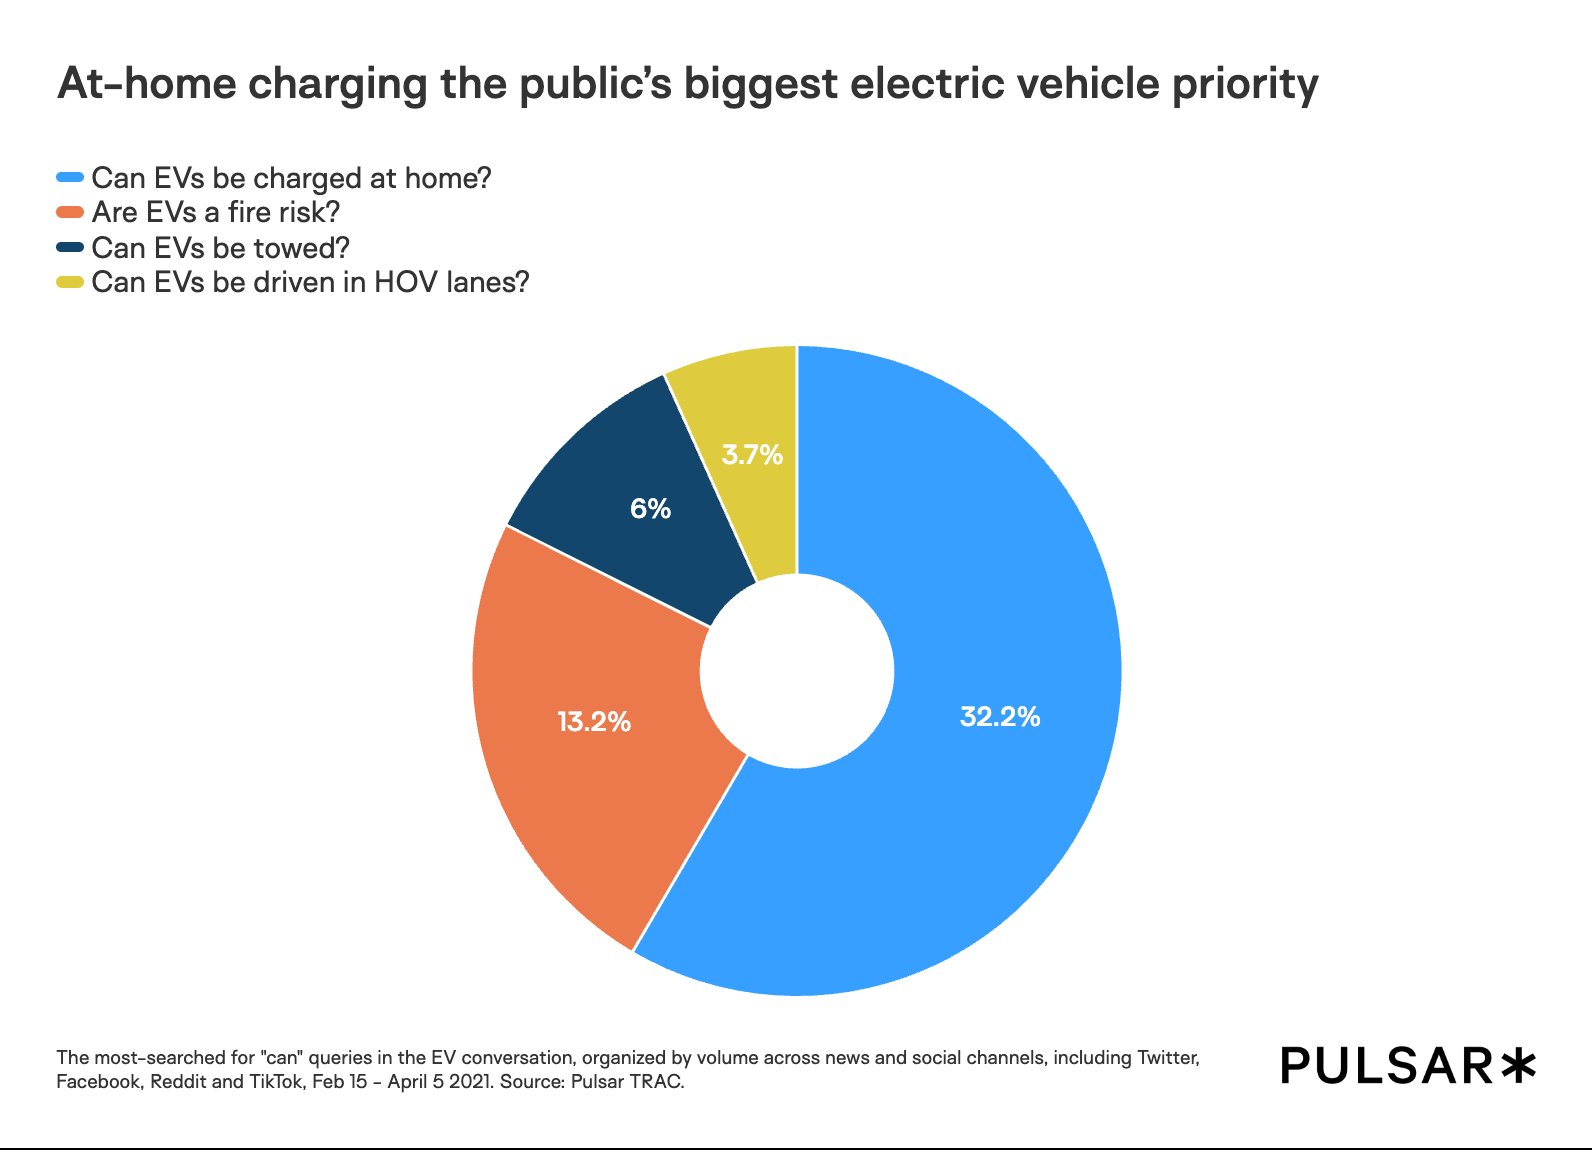 At-home charging the public’s biggest electric vehicle priority